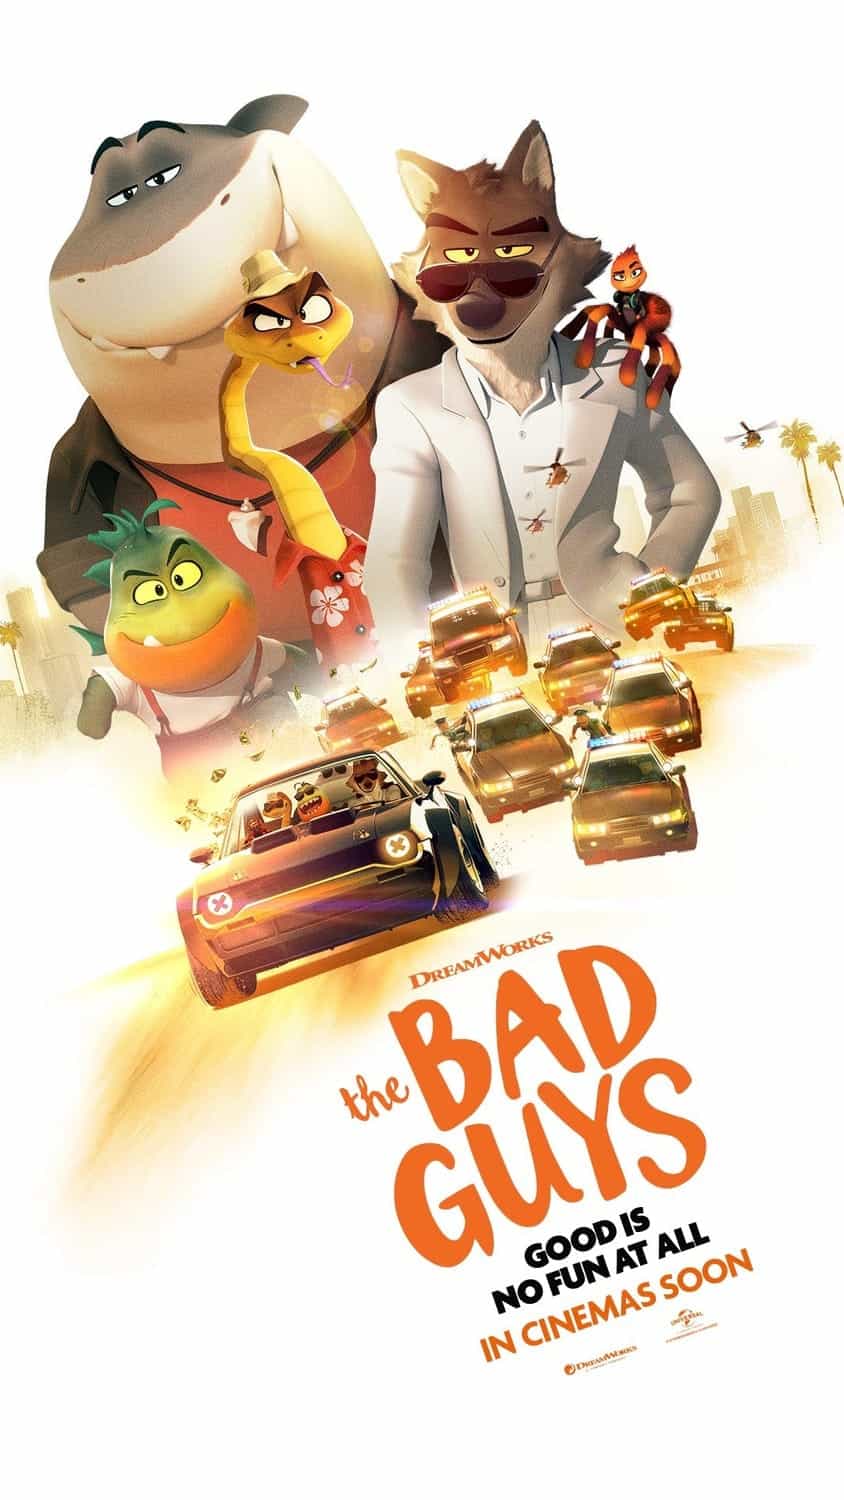 The Bad Guys has been given a U age rating in the UK for mild threat, very mild bad language, comic violence, rude humour